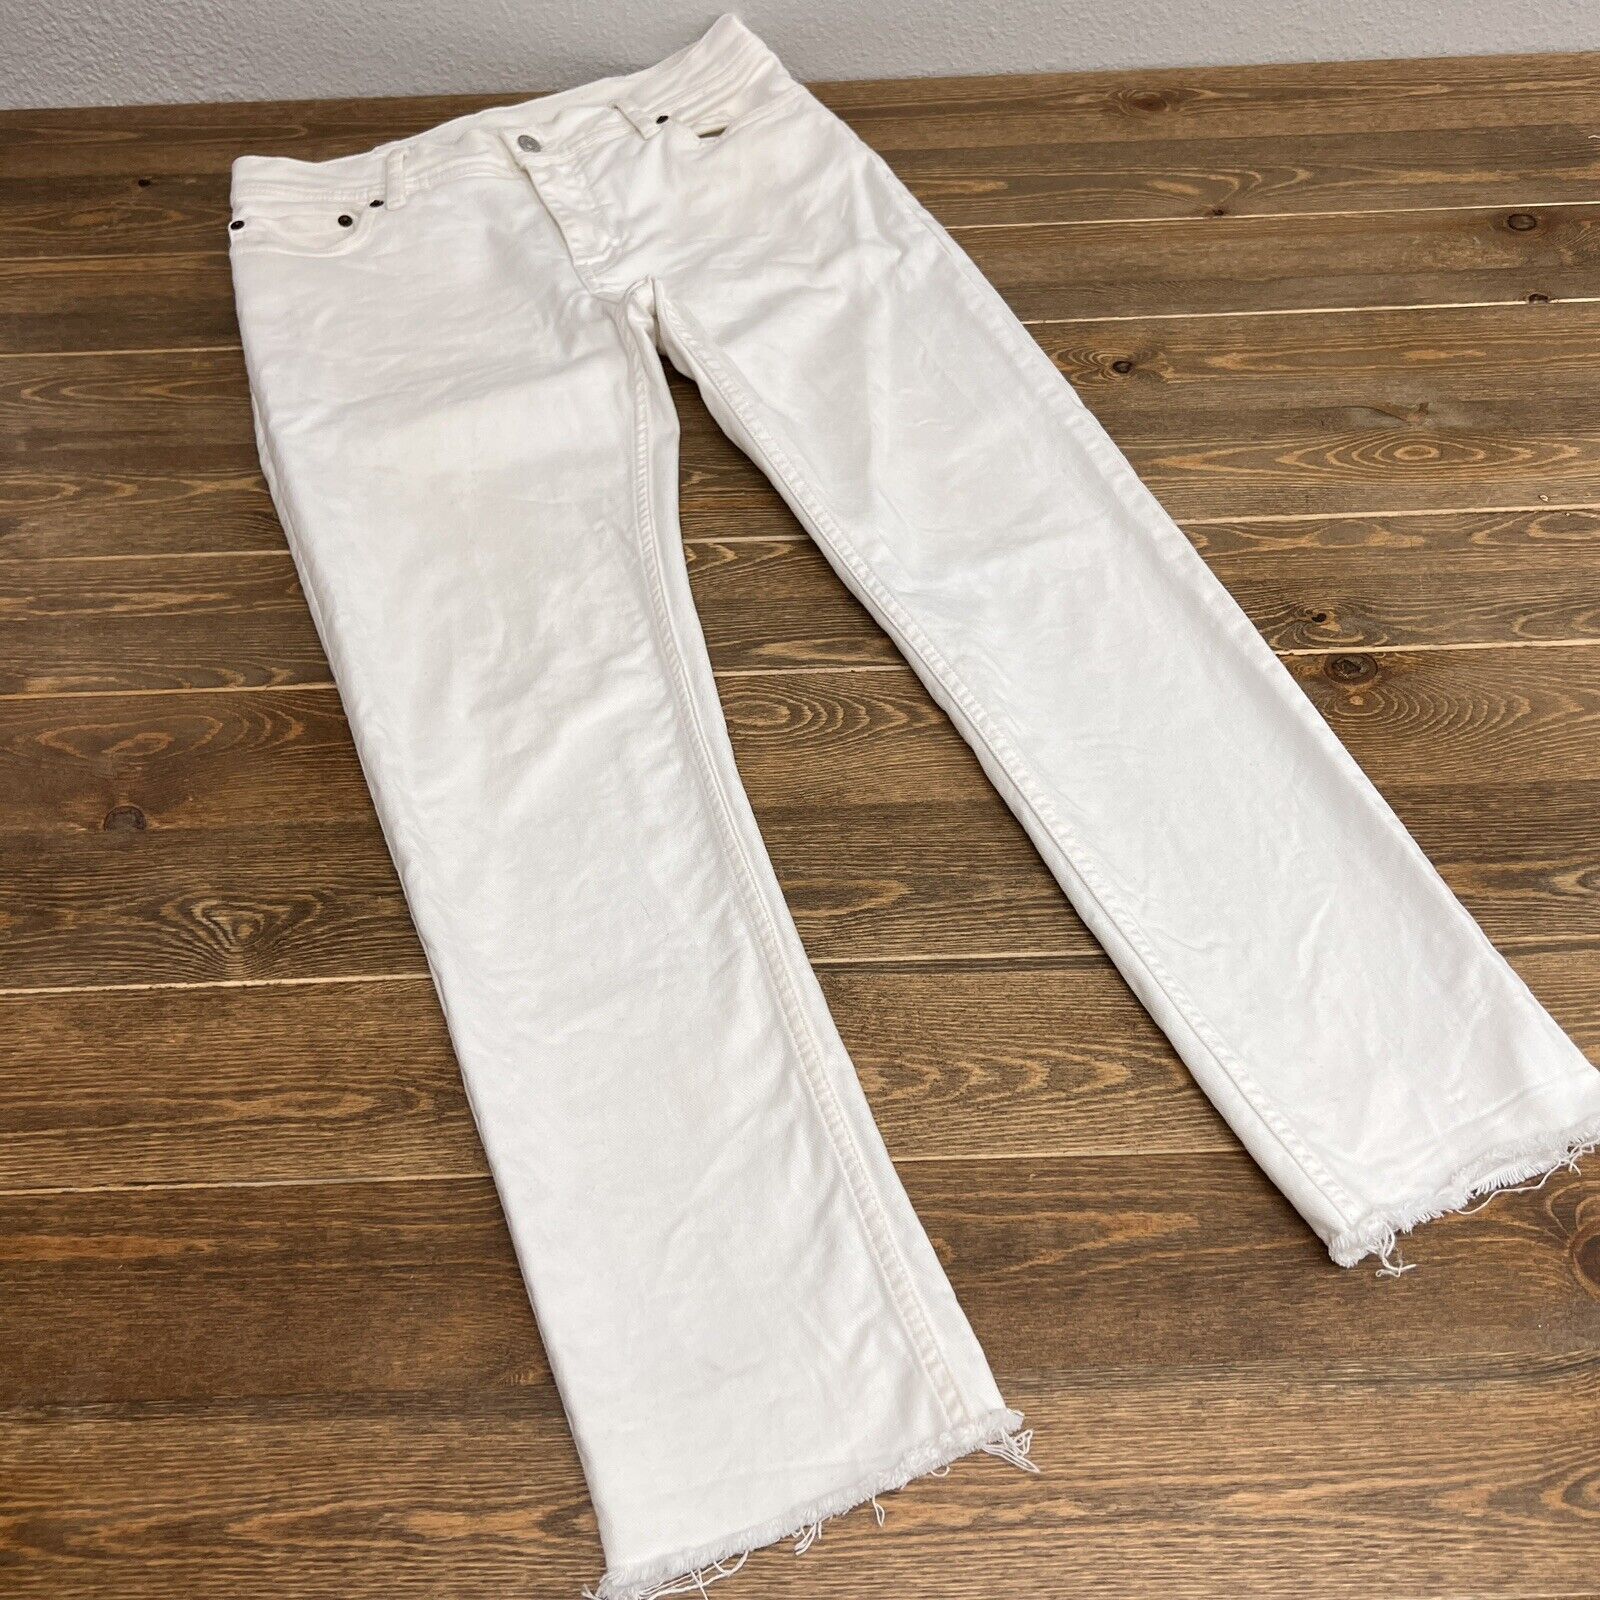 Acne Studios Bla Konst North White Jeans Size 34 Made in Italy